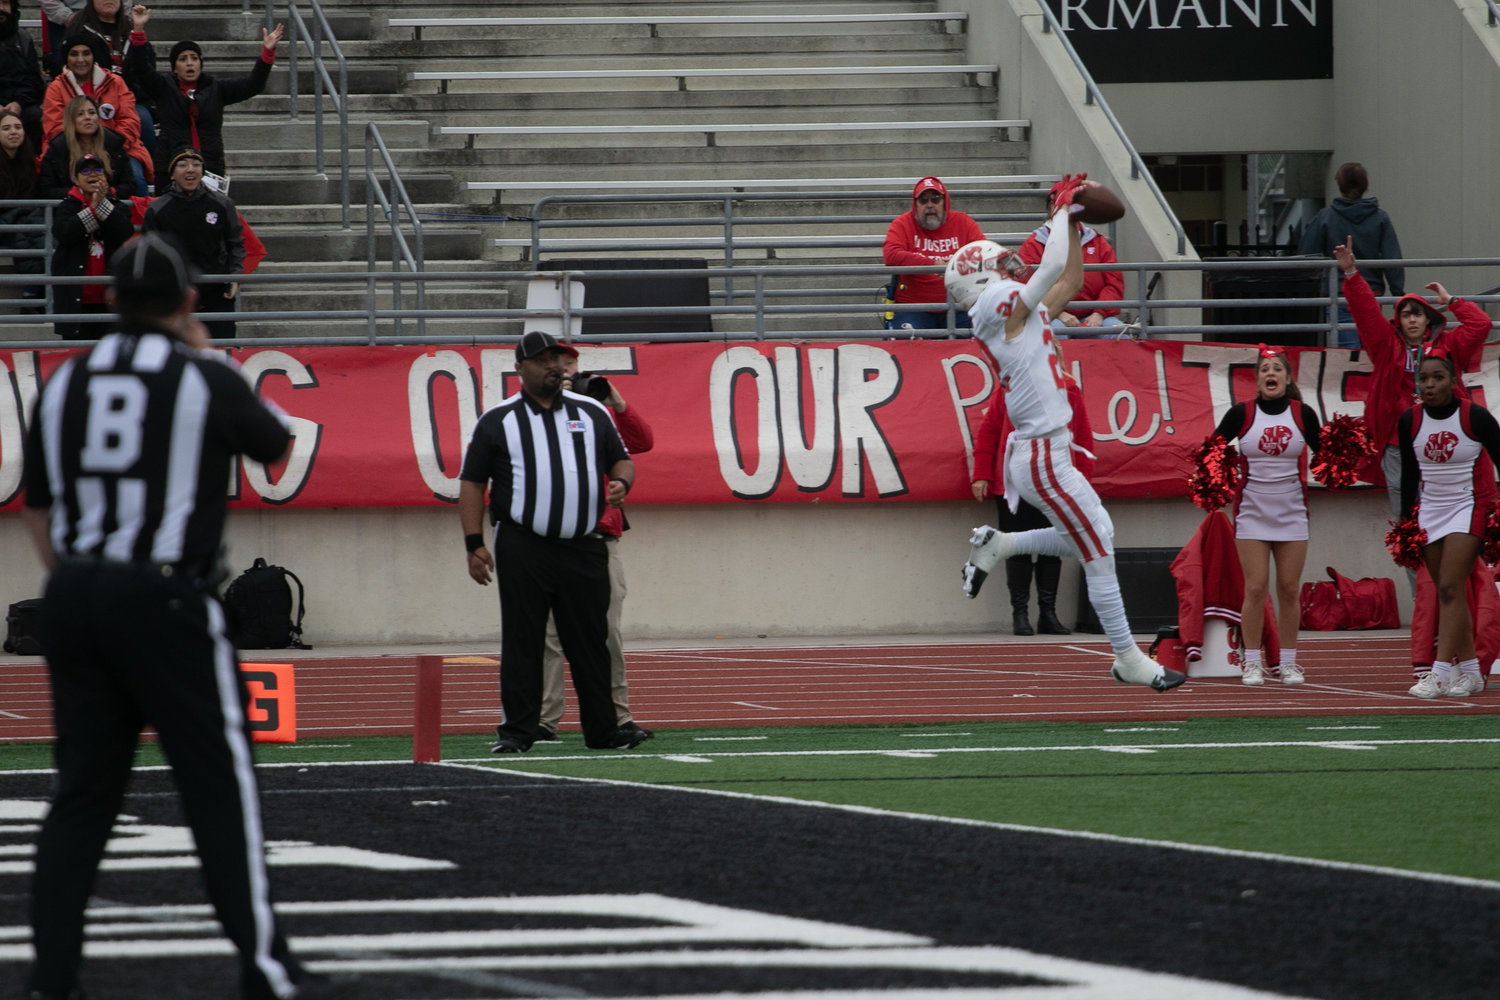 Adam Jackson makes a catch for a touchdown during Friday's Class 6A-Divison II Region III Semifinal at Turner Stadium.